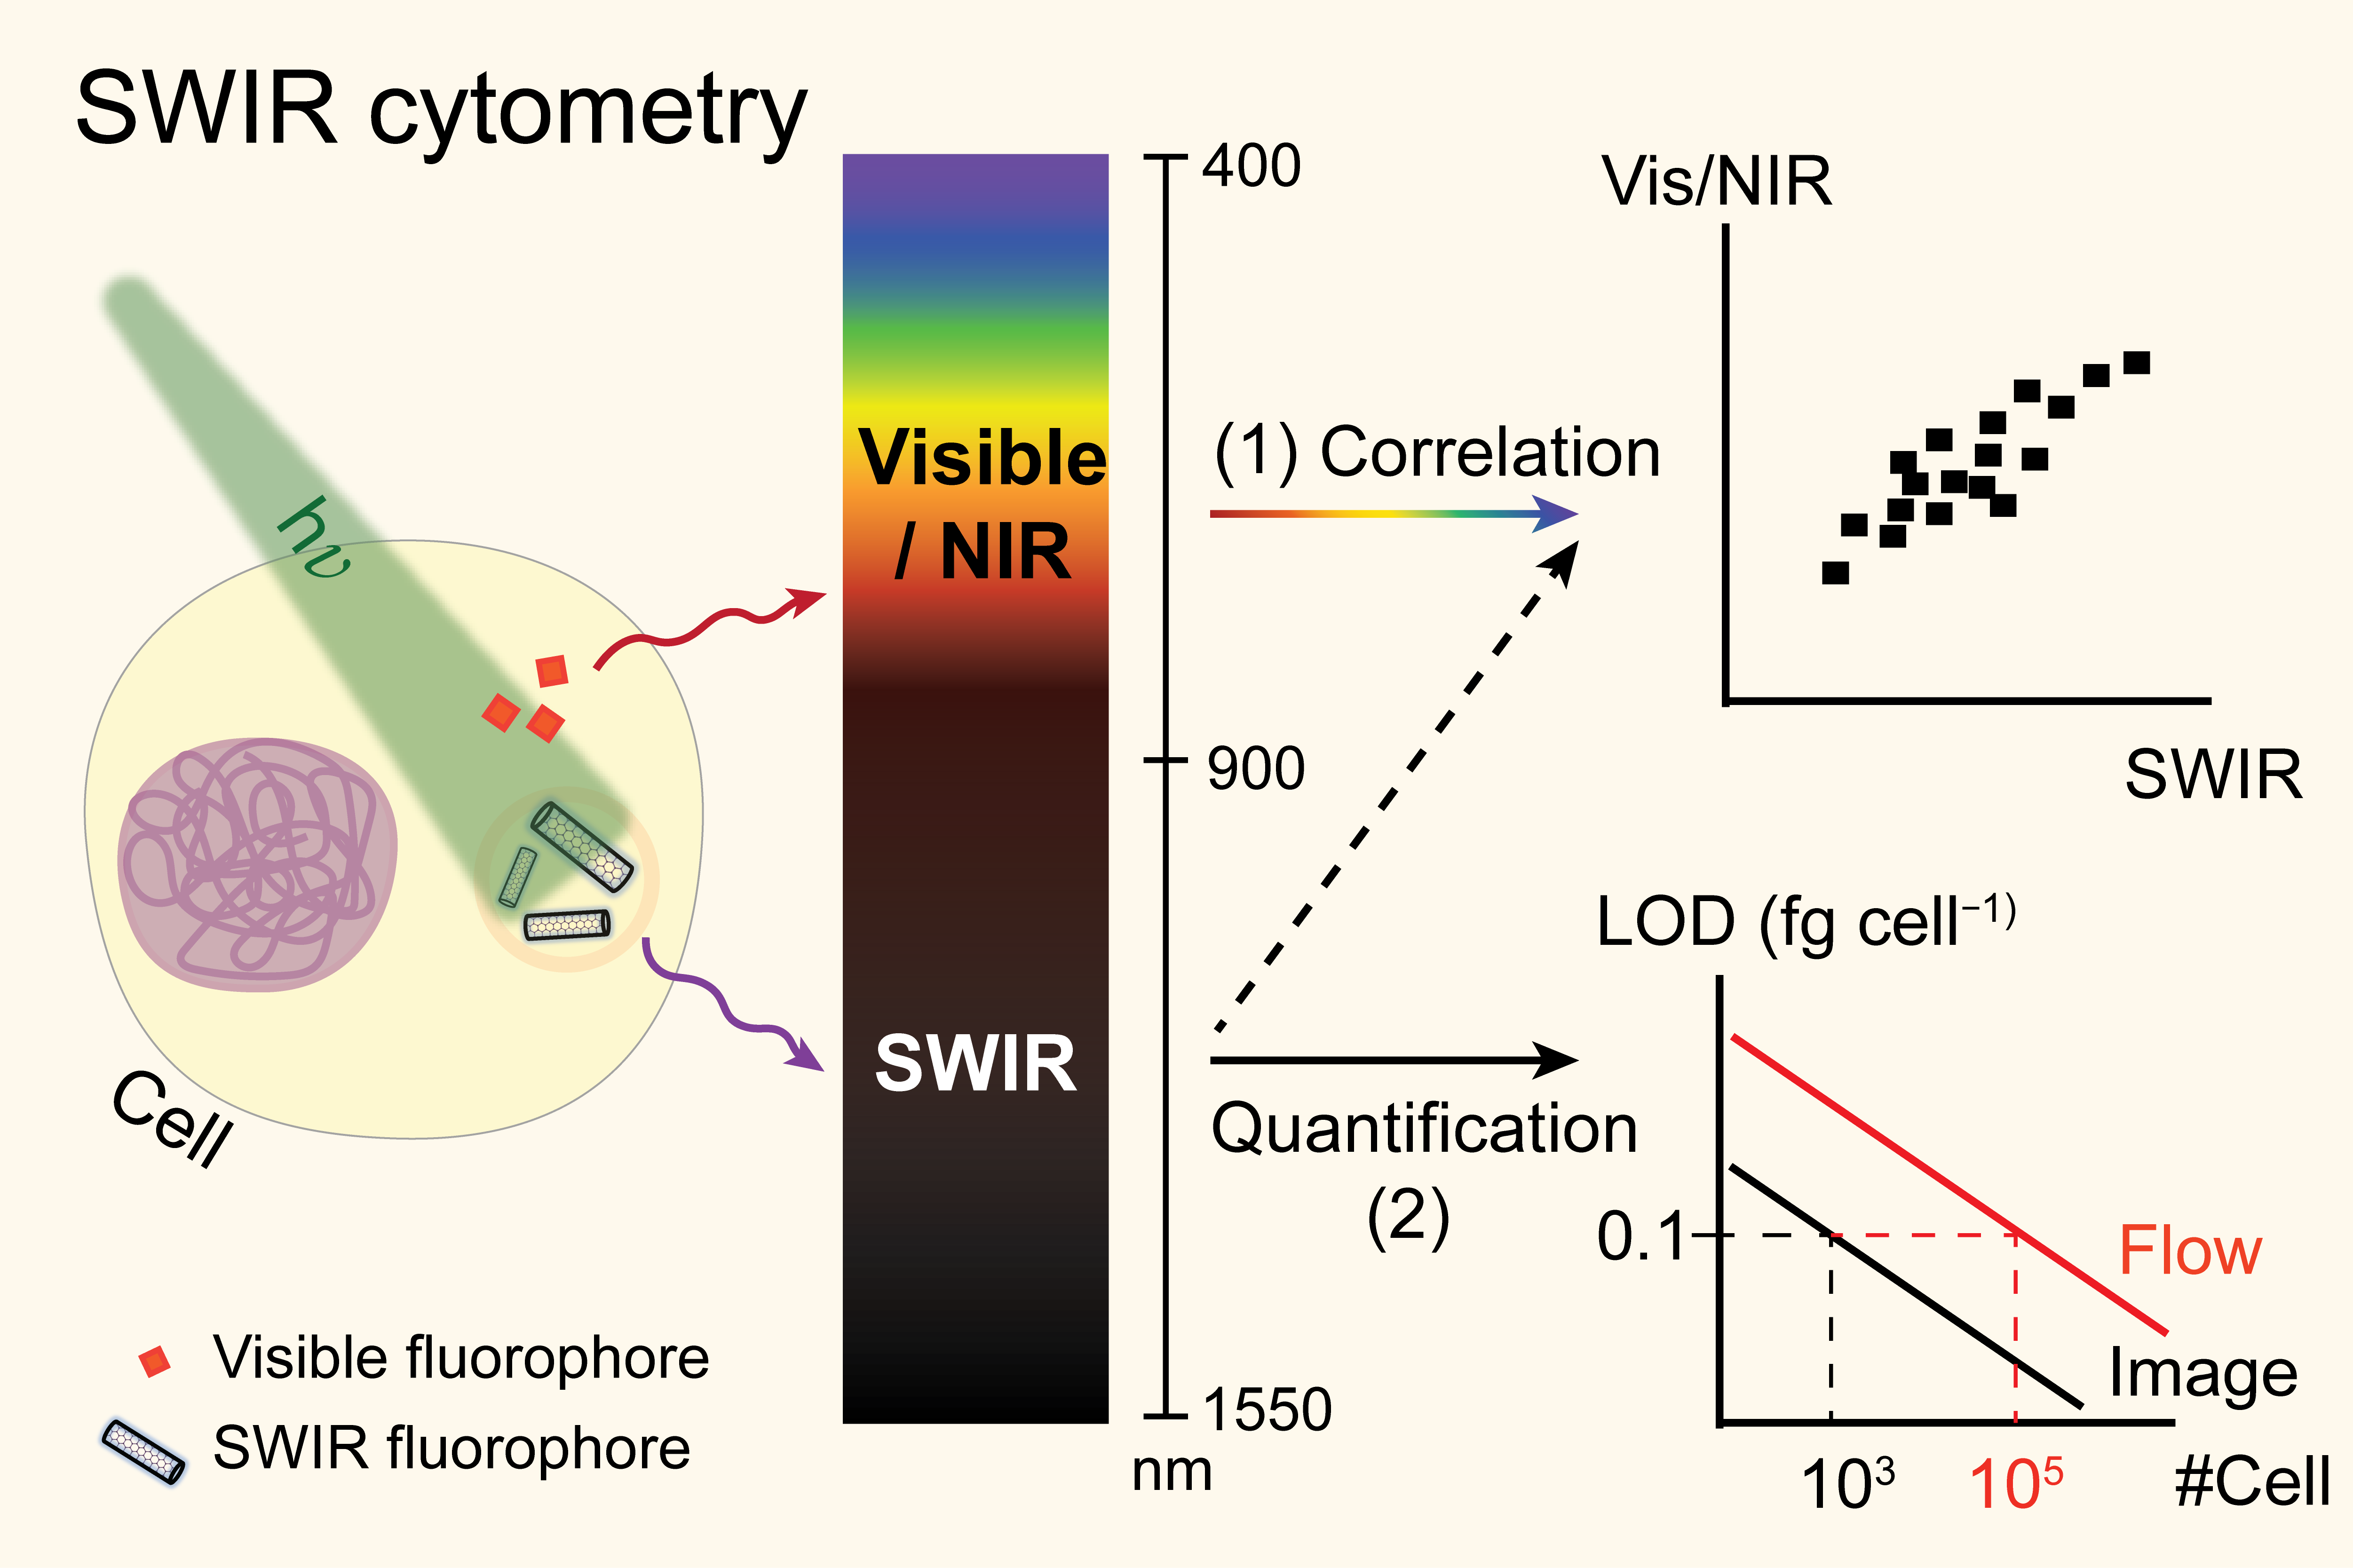 Short-wave infrared fluorescence cytometry: The next-generation analytical technology for fluorescently labelled cells